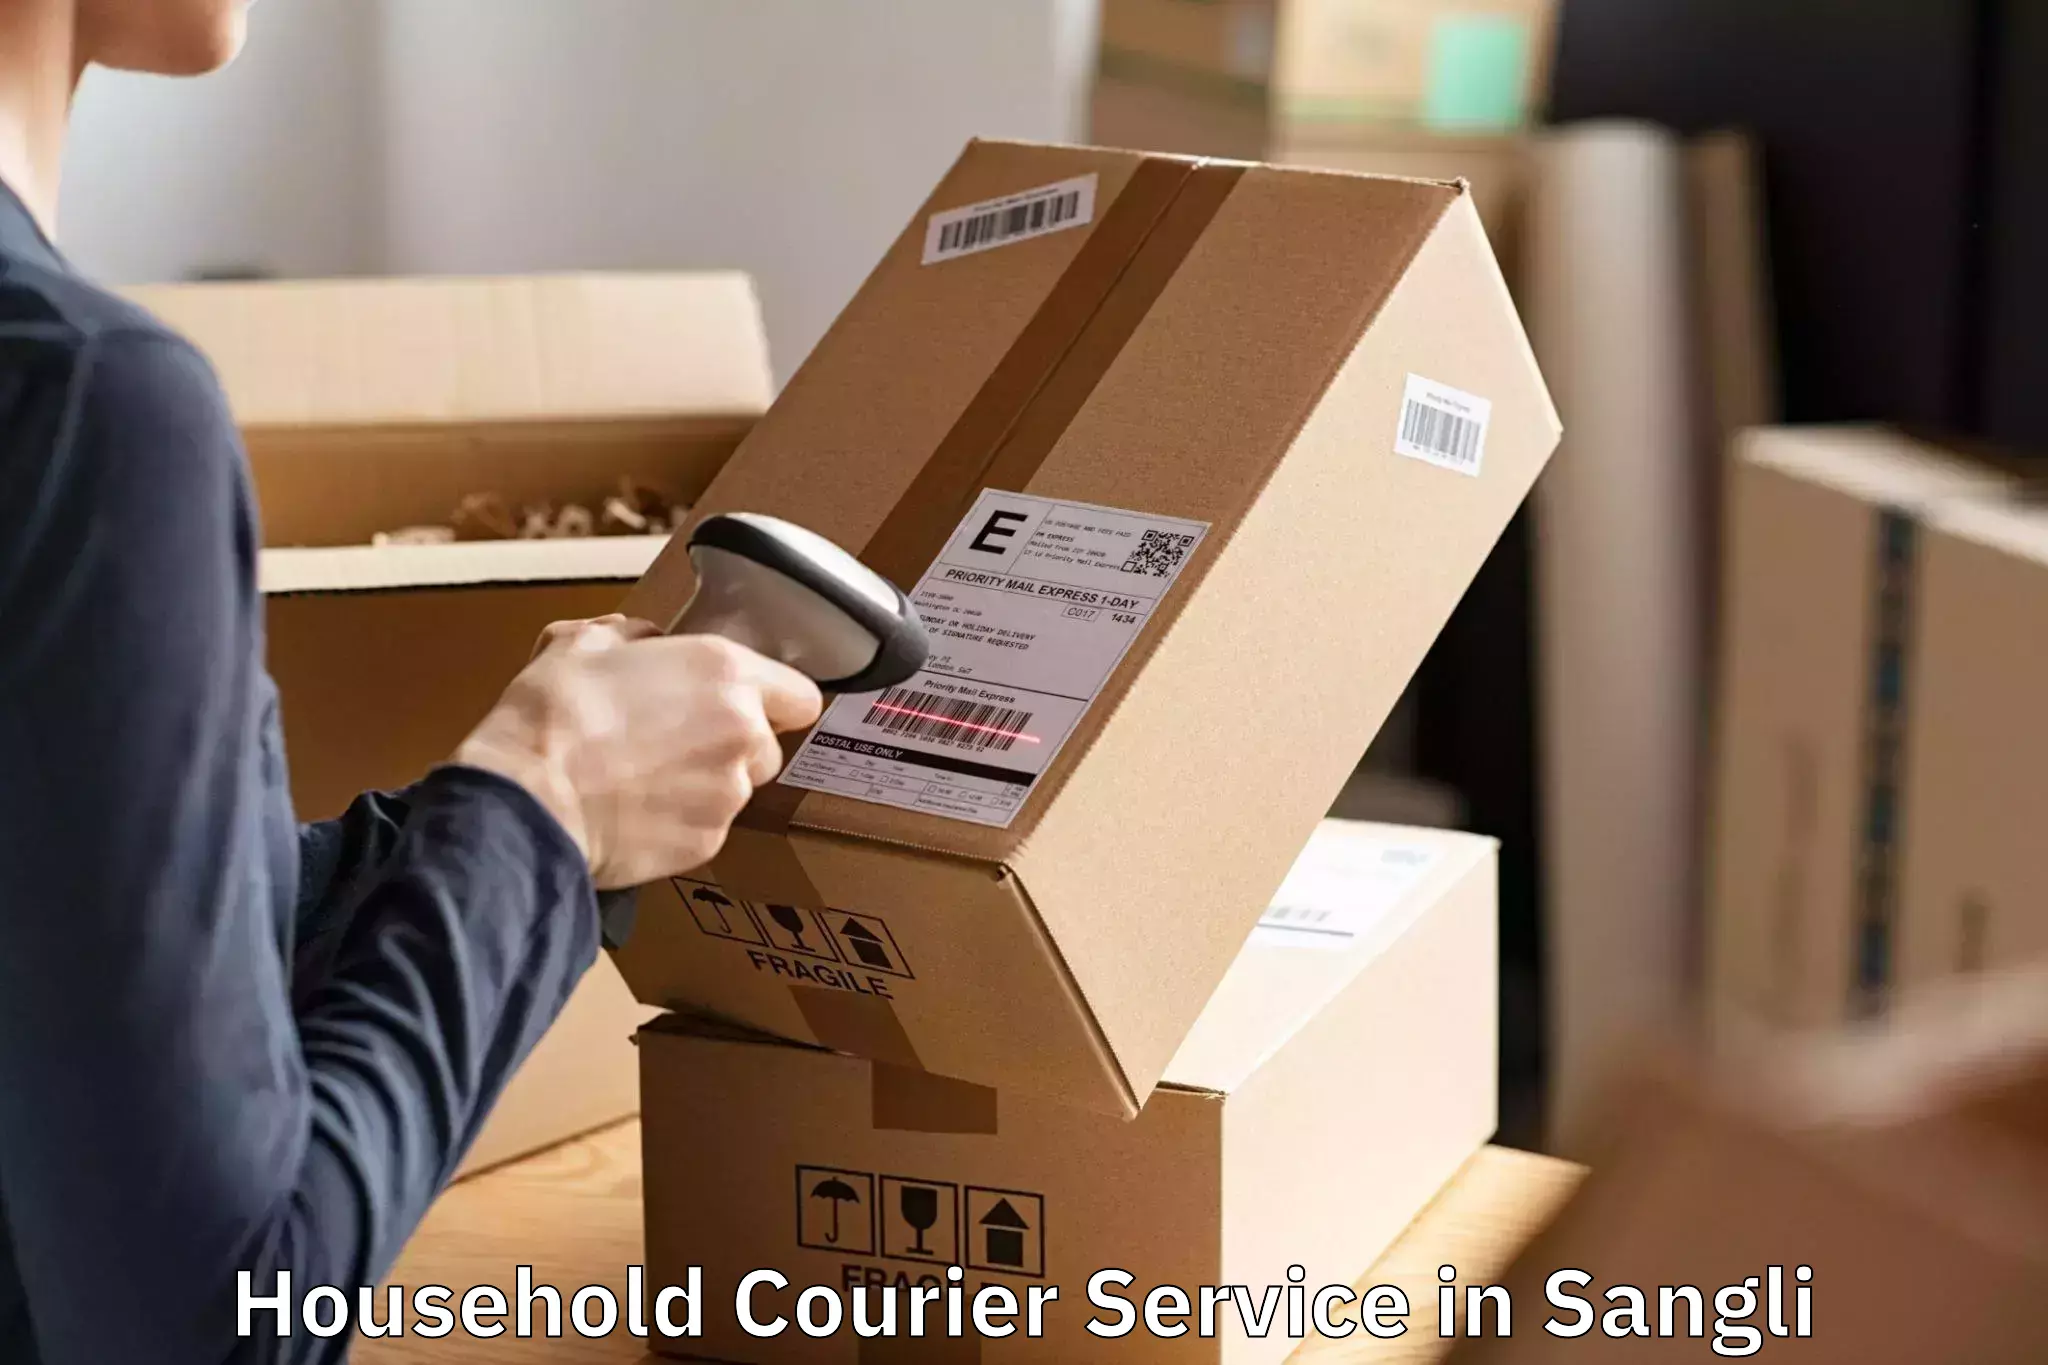 Get Household Courier Service in Sangli, Maharashtra (MH)